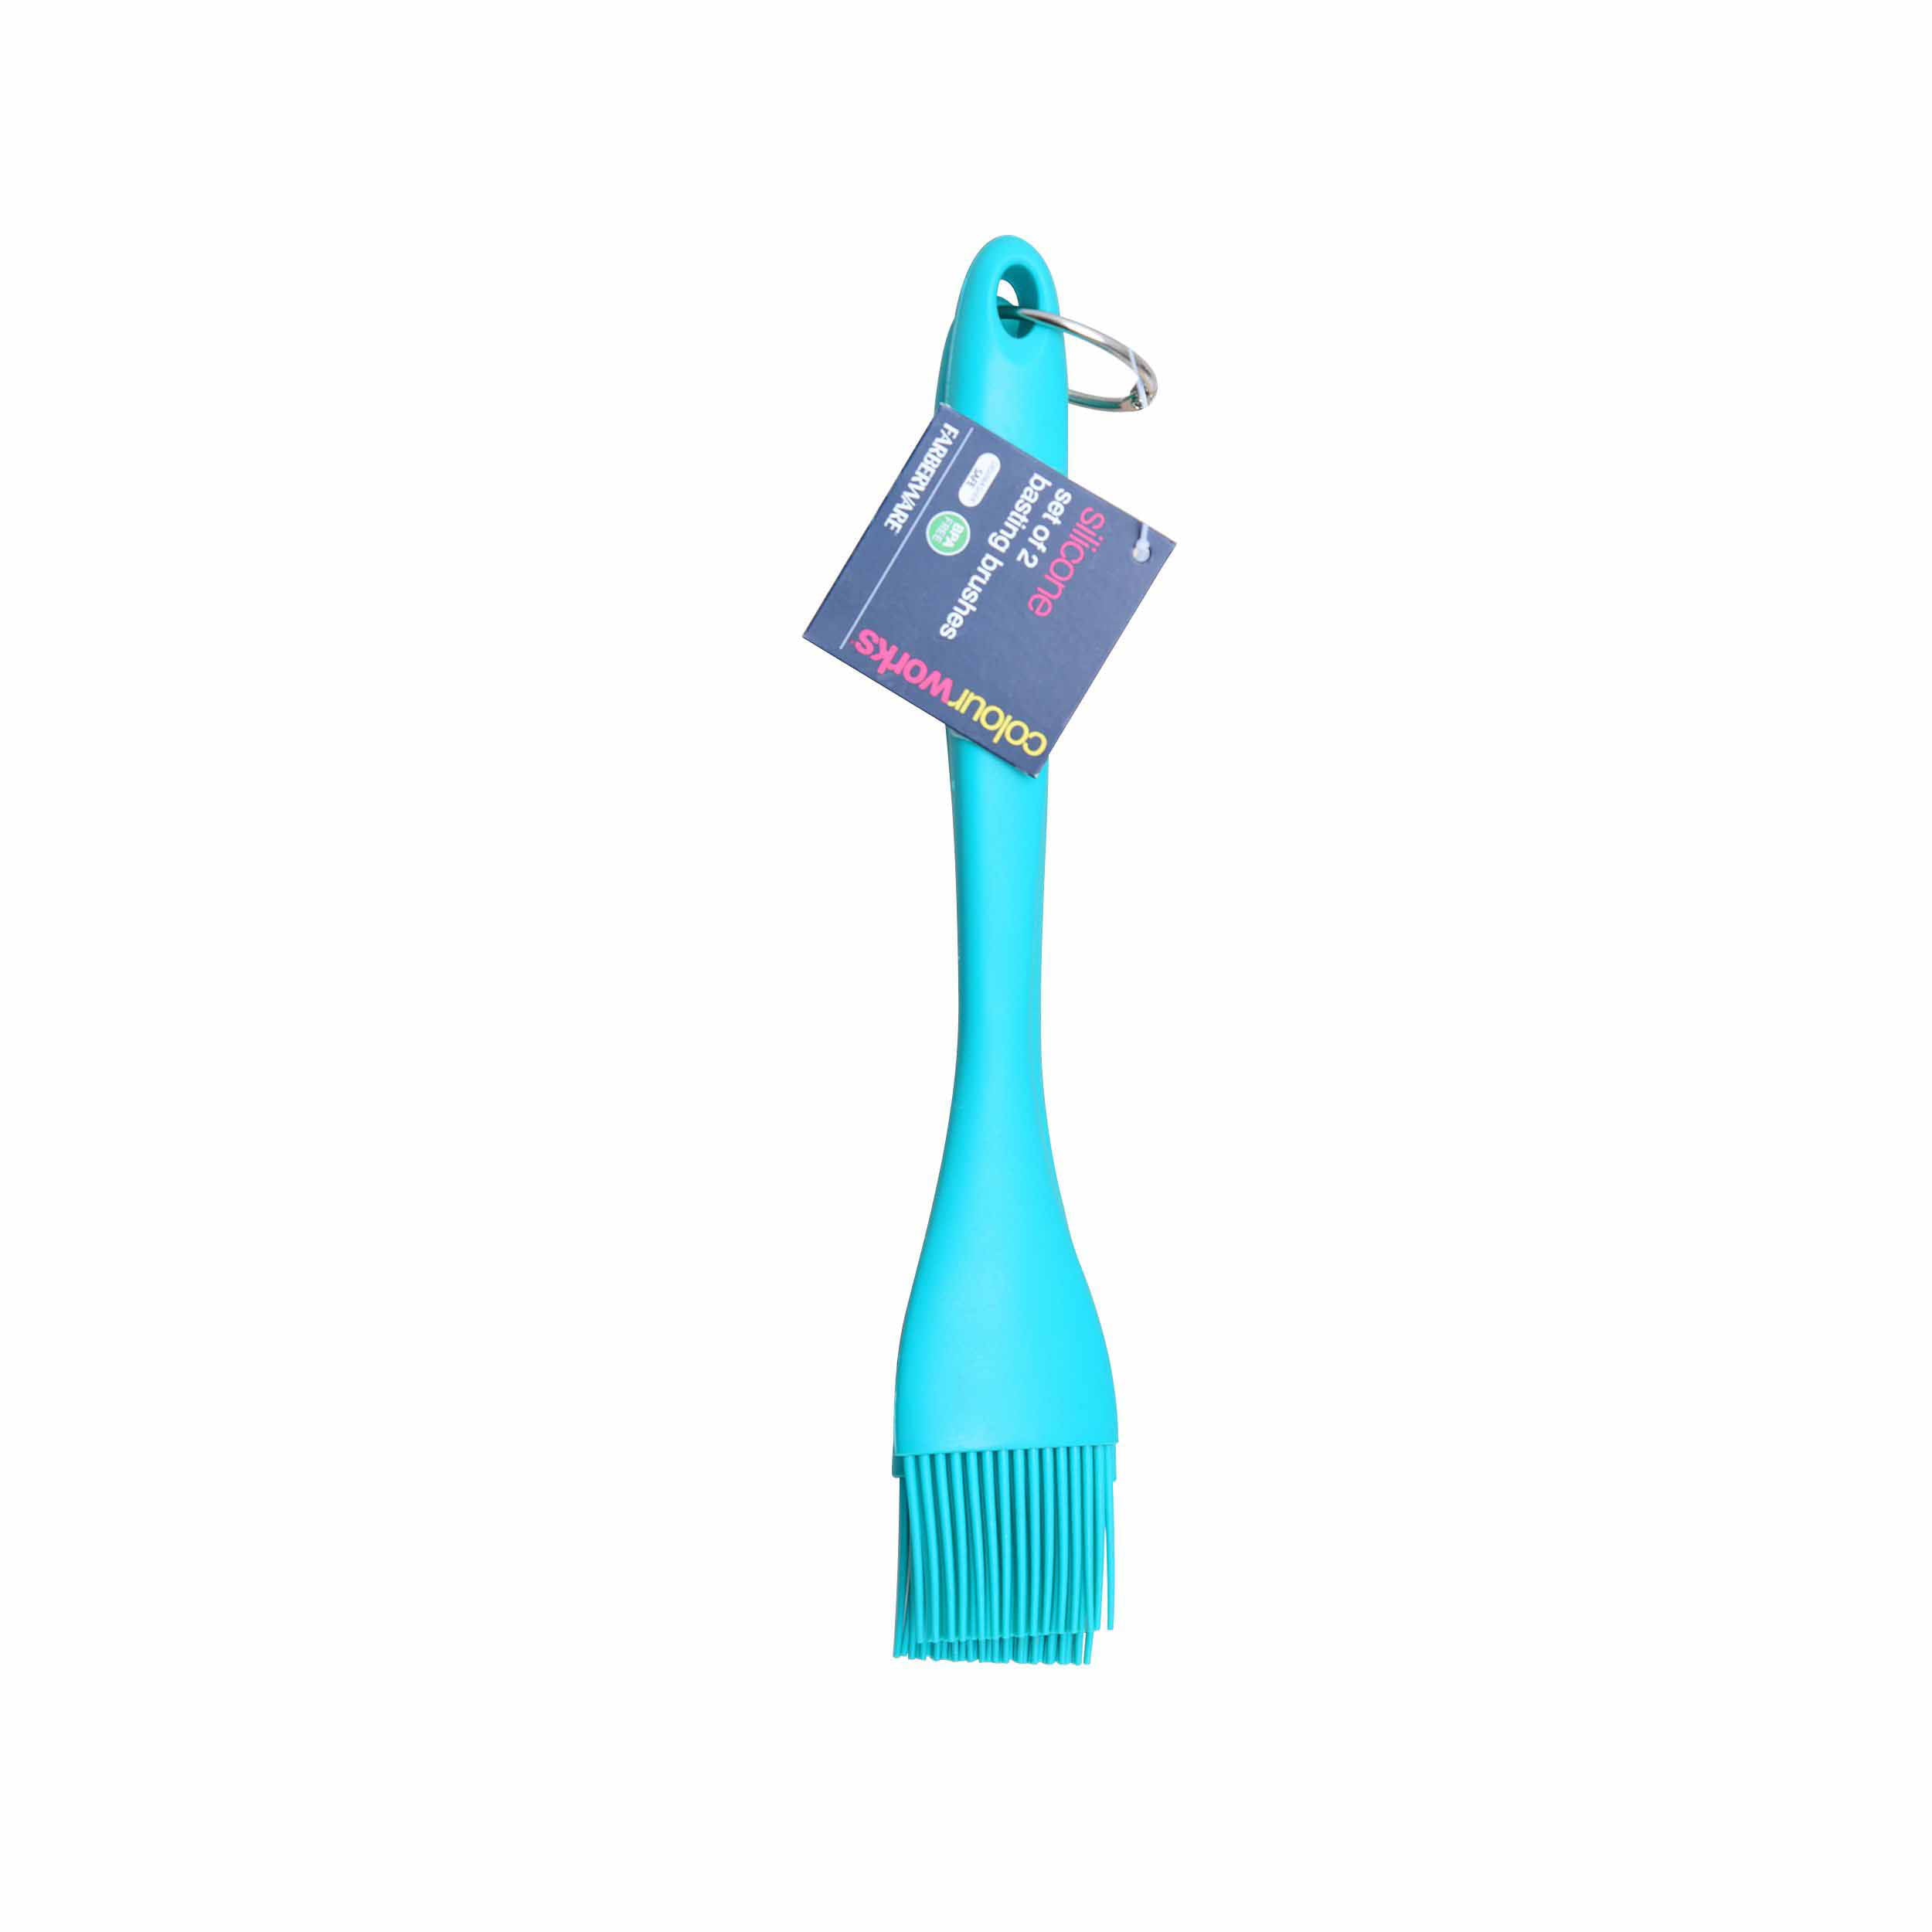 Silicone Basting Brush Pioneer Woman Collection Teal Colored